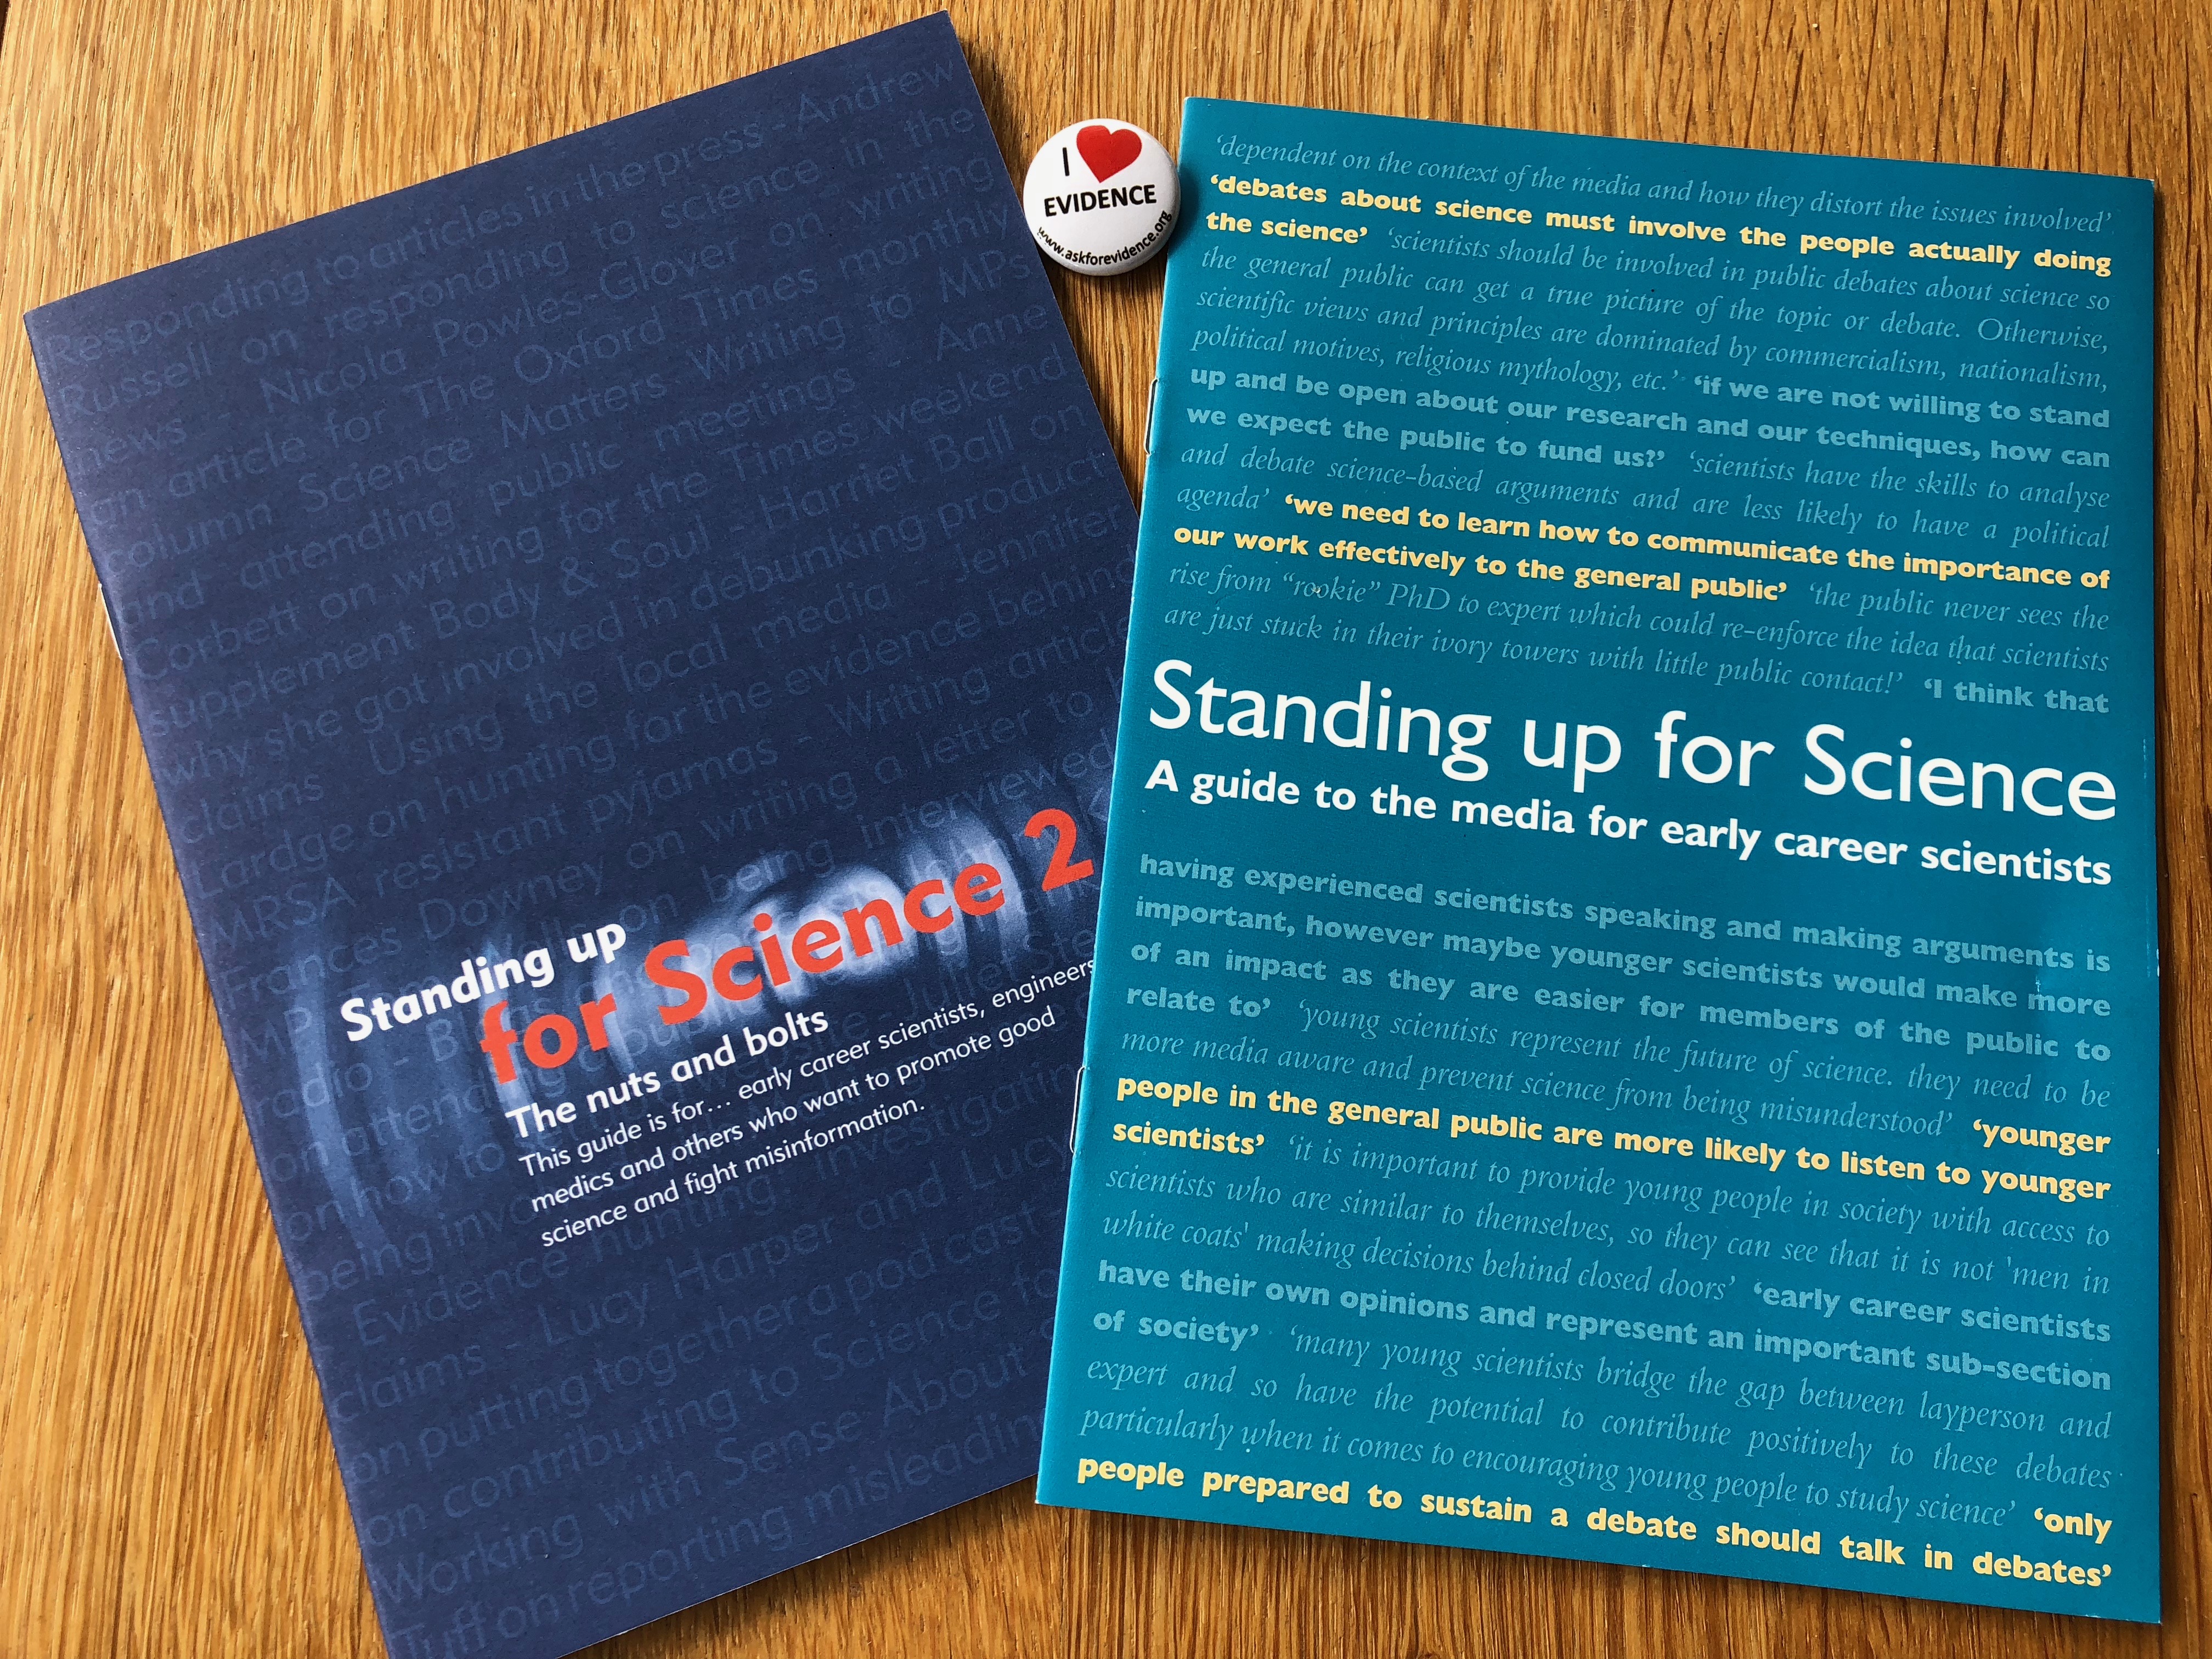 Standing up for Science